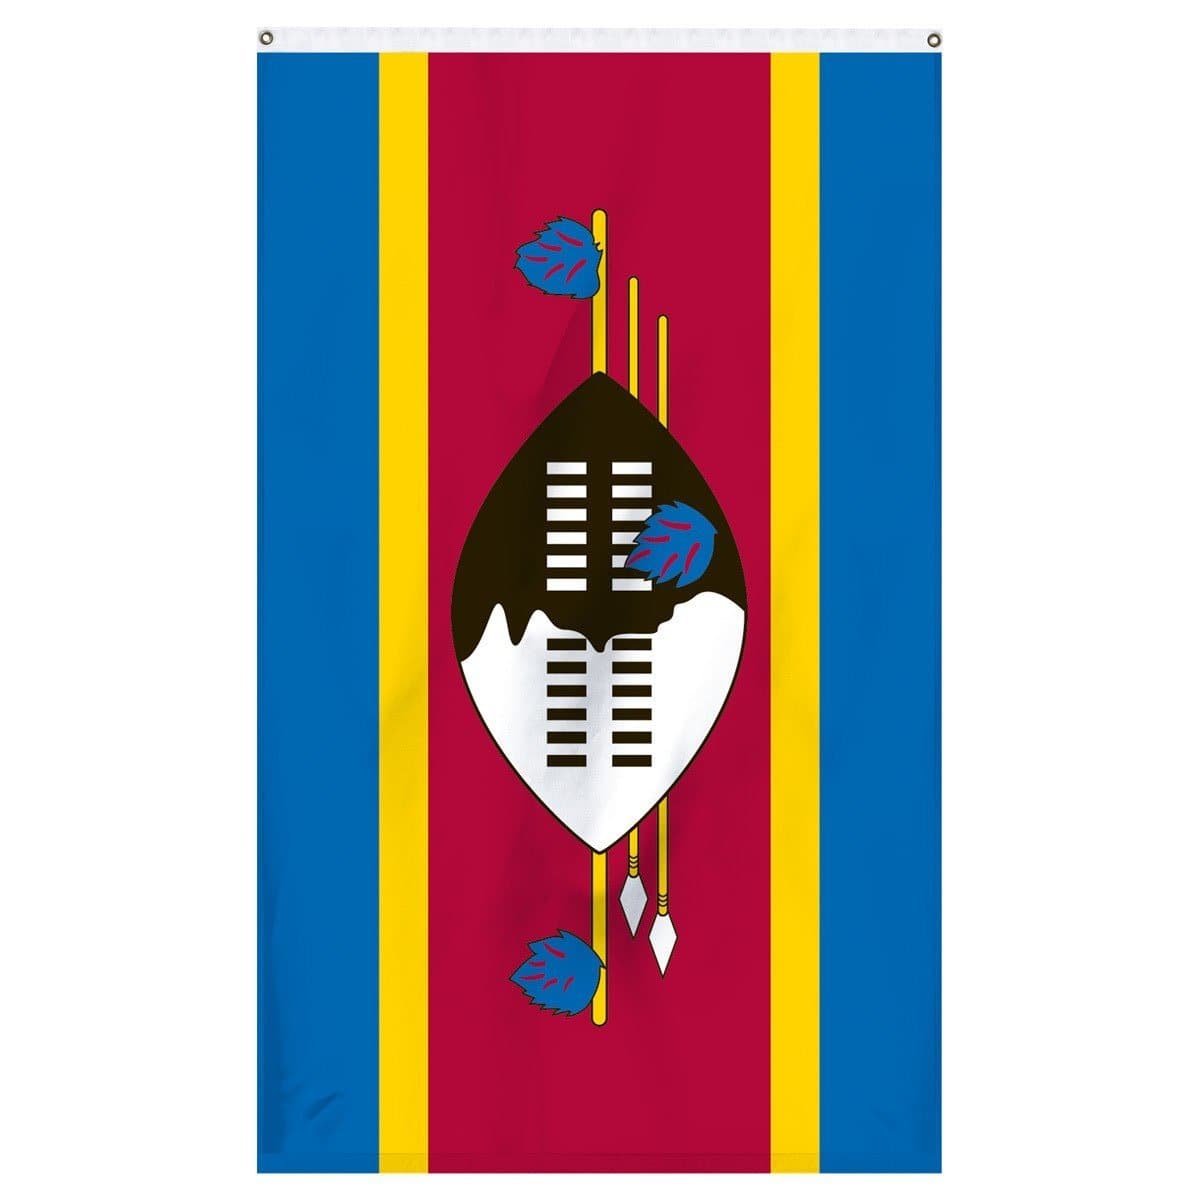 Swaziland National flag for sale to buy online from Atlantic Flag and Pole. Blue, yellow, and red flag with a white and black shield in the center with arrows and spears.